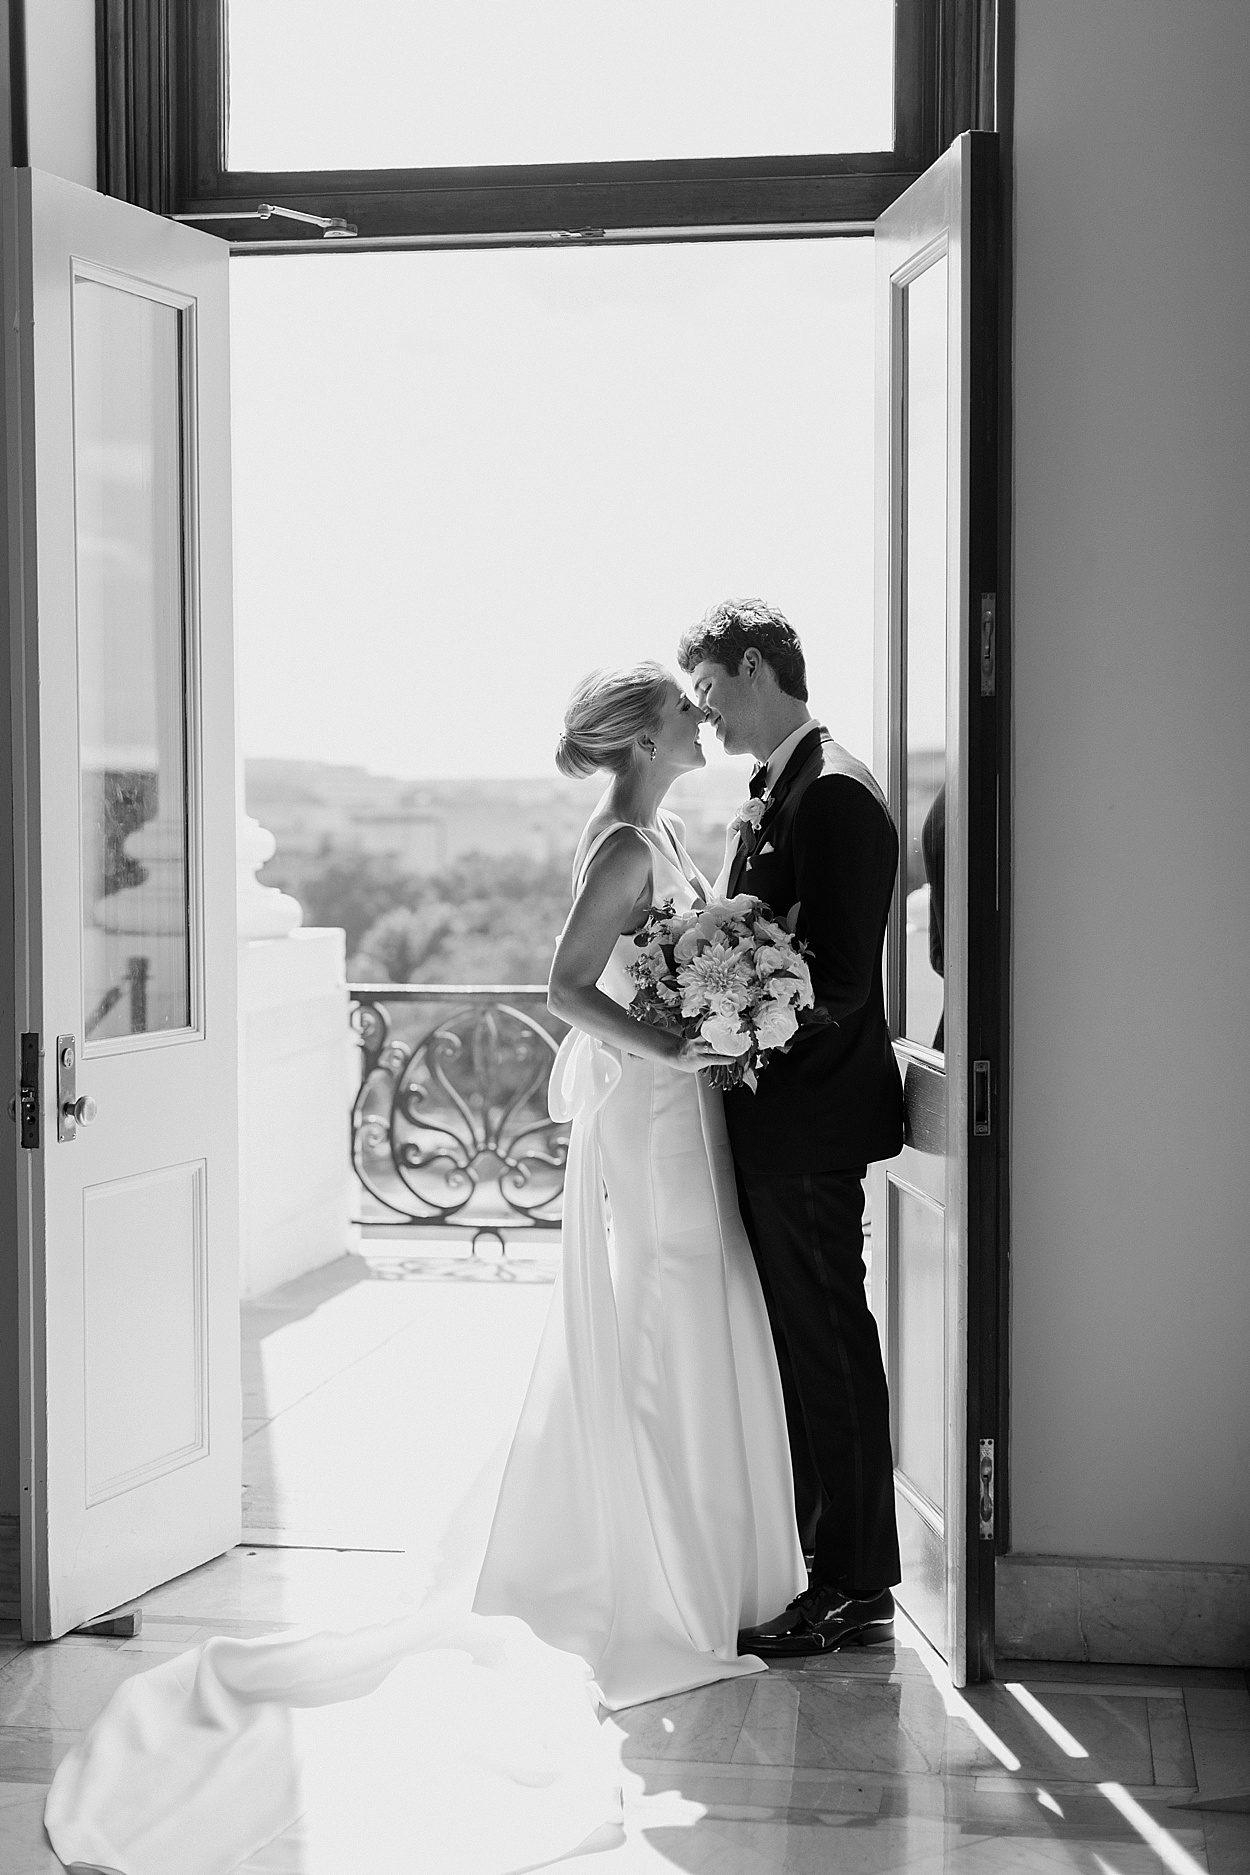 Speaker's balcony wedding portraits at the US Capitol | Abby Grace Photography